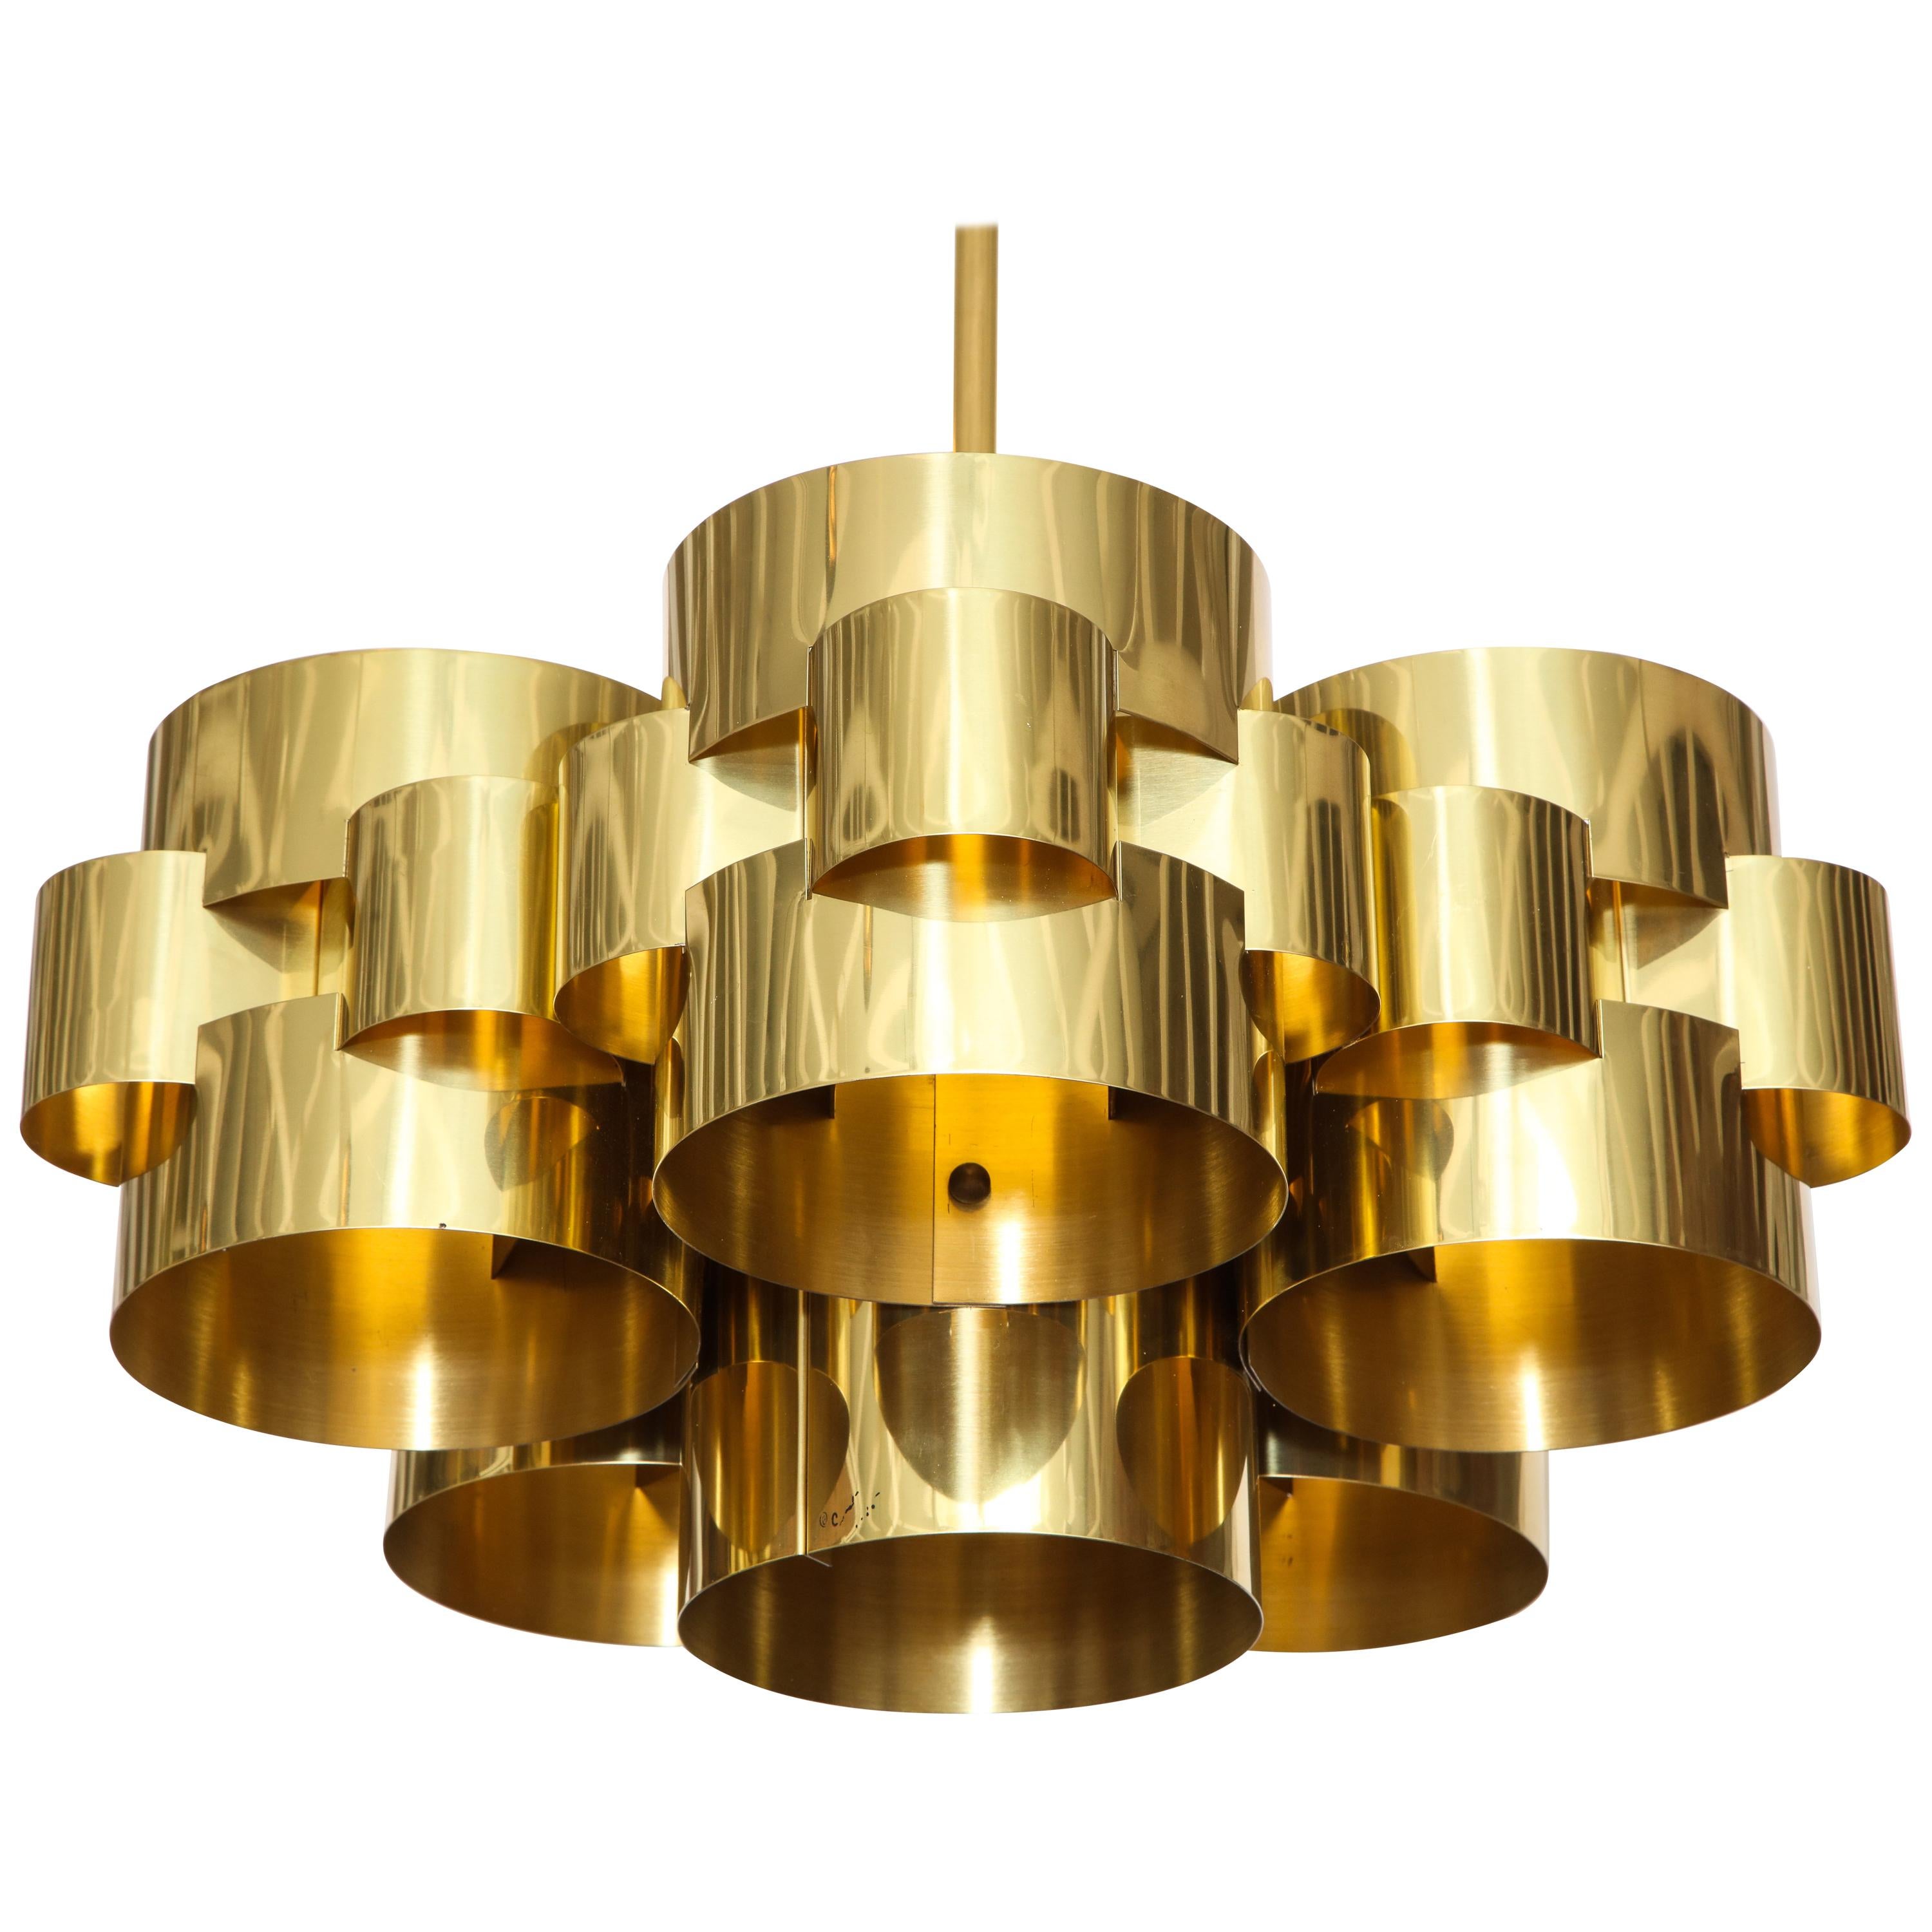 C. Jere cloud chandelier, brass, signed. Five-light lacquered brass cloud form chandelier in good original condition. We've added a 24.75 inch rod and solid brass circular canopy and is recessed by 3 1/4